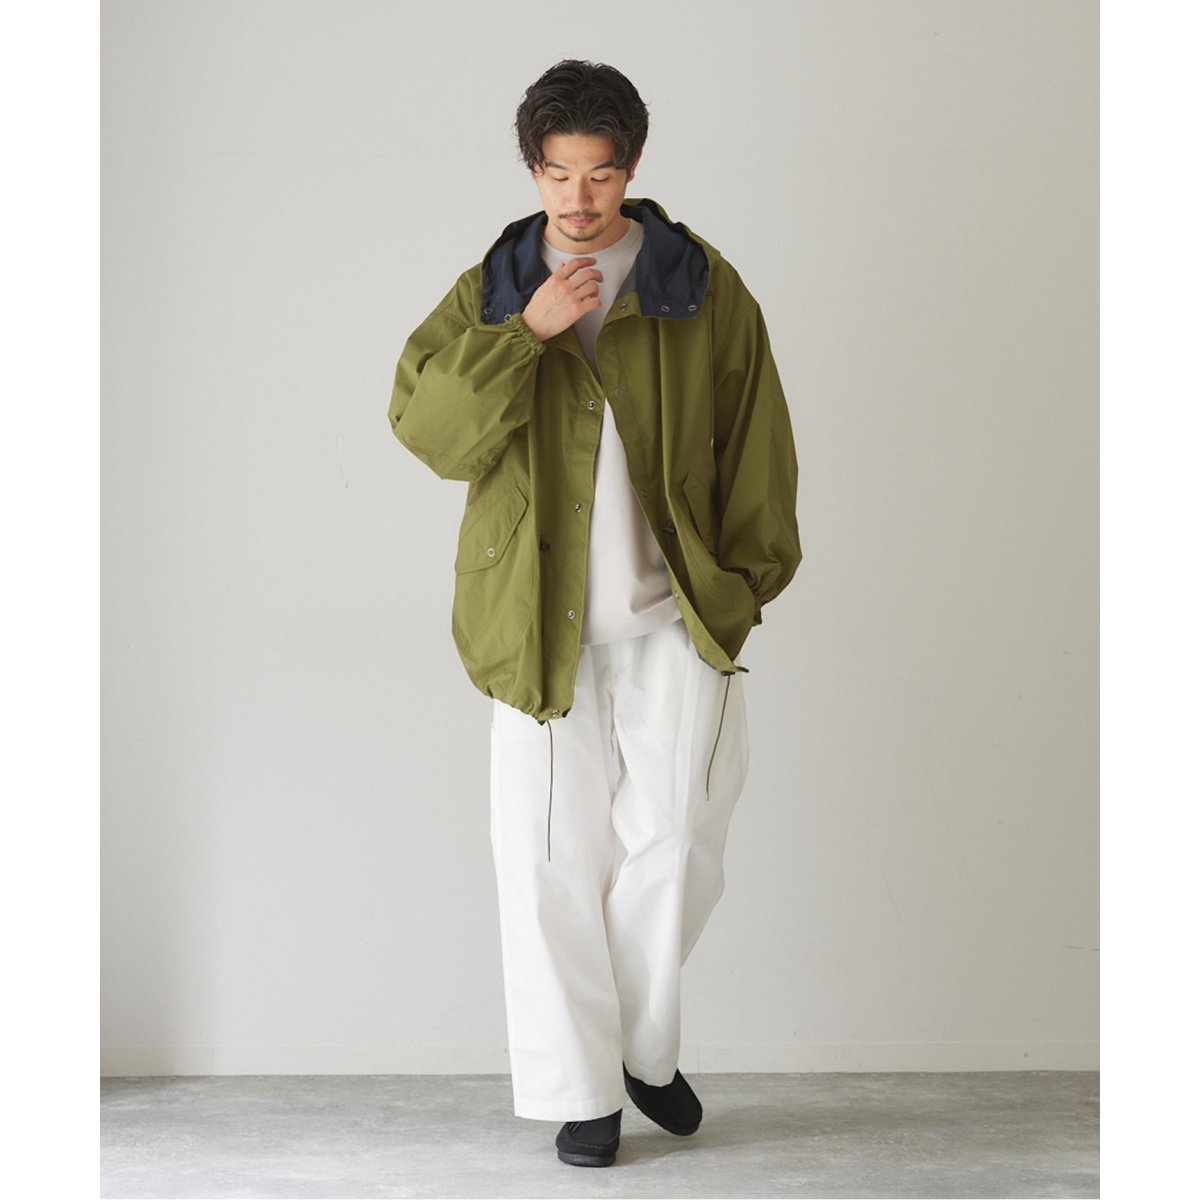 marka × WILDTHINGS × 417】別注 SNOW PARKA | 417 エディフィス